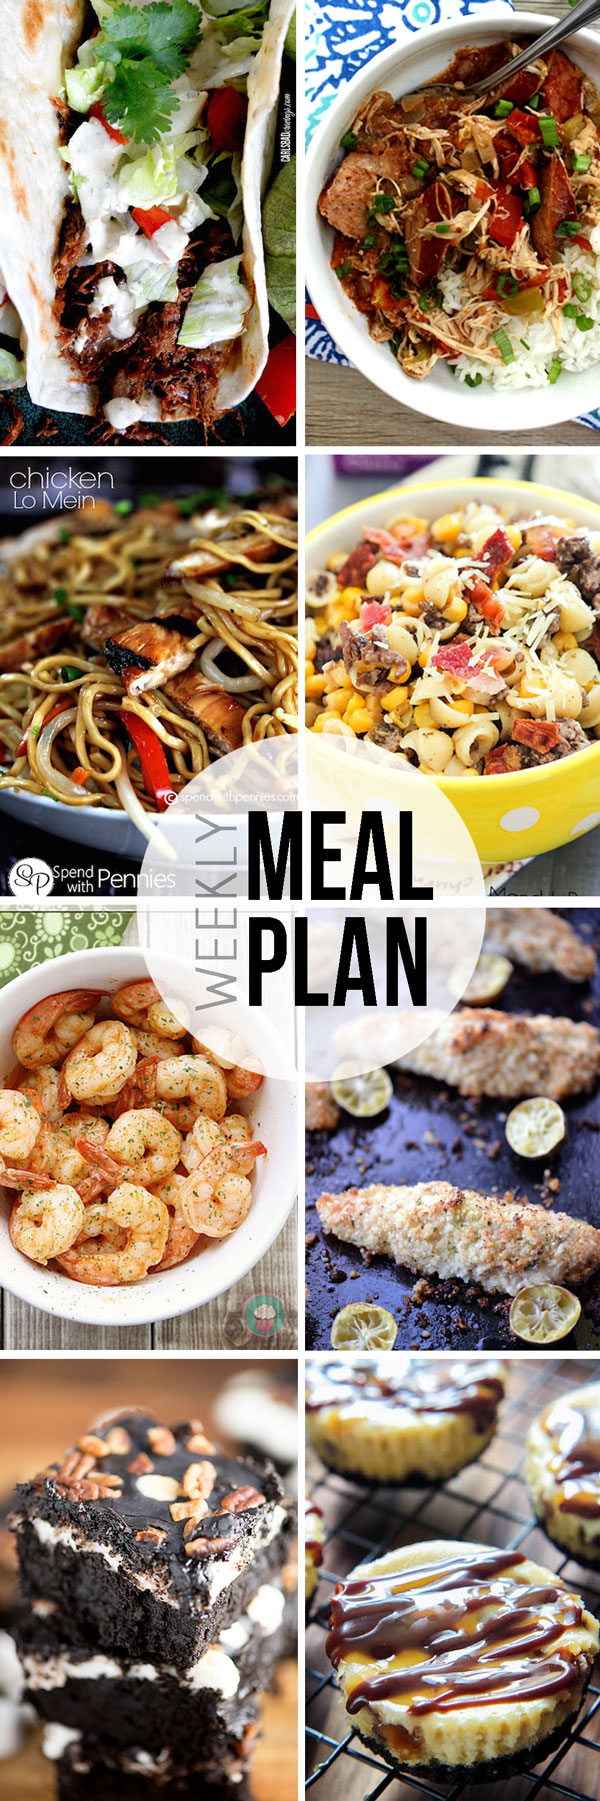 Easy Meal Plan Sunday #9